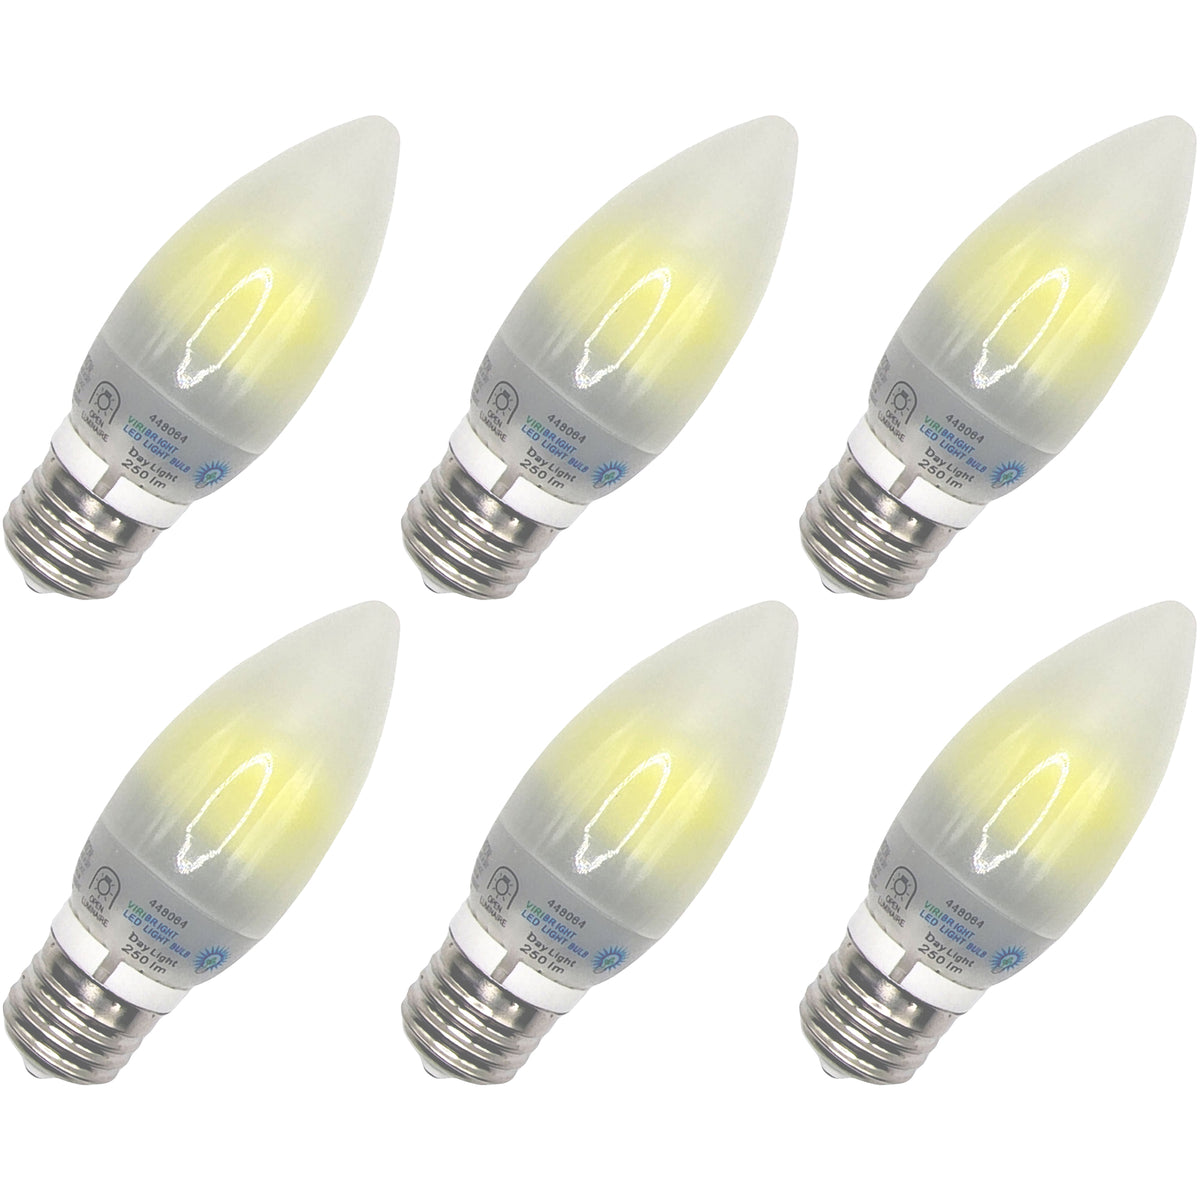 Picture of Viribright 74277-6 6000K 3.2W 22W Equivalent E26 Daylight Chandelier LED Bulb - Pack of 6